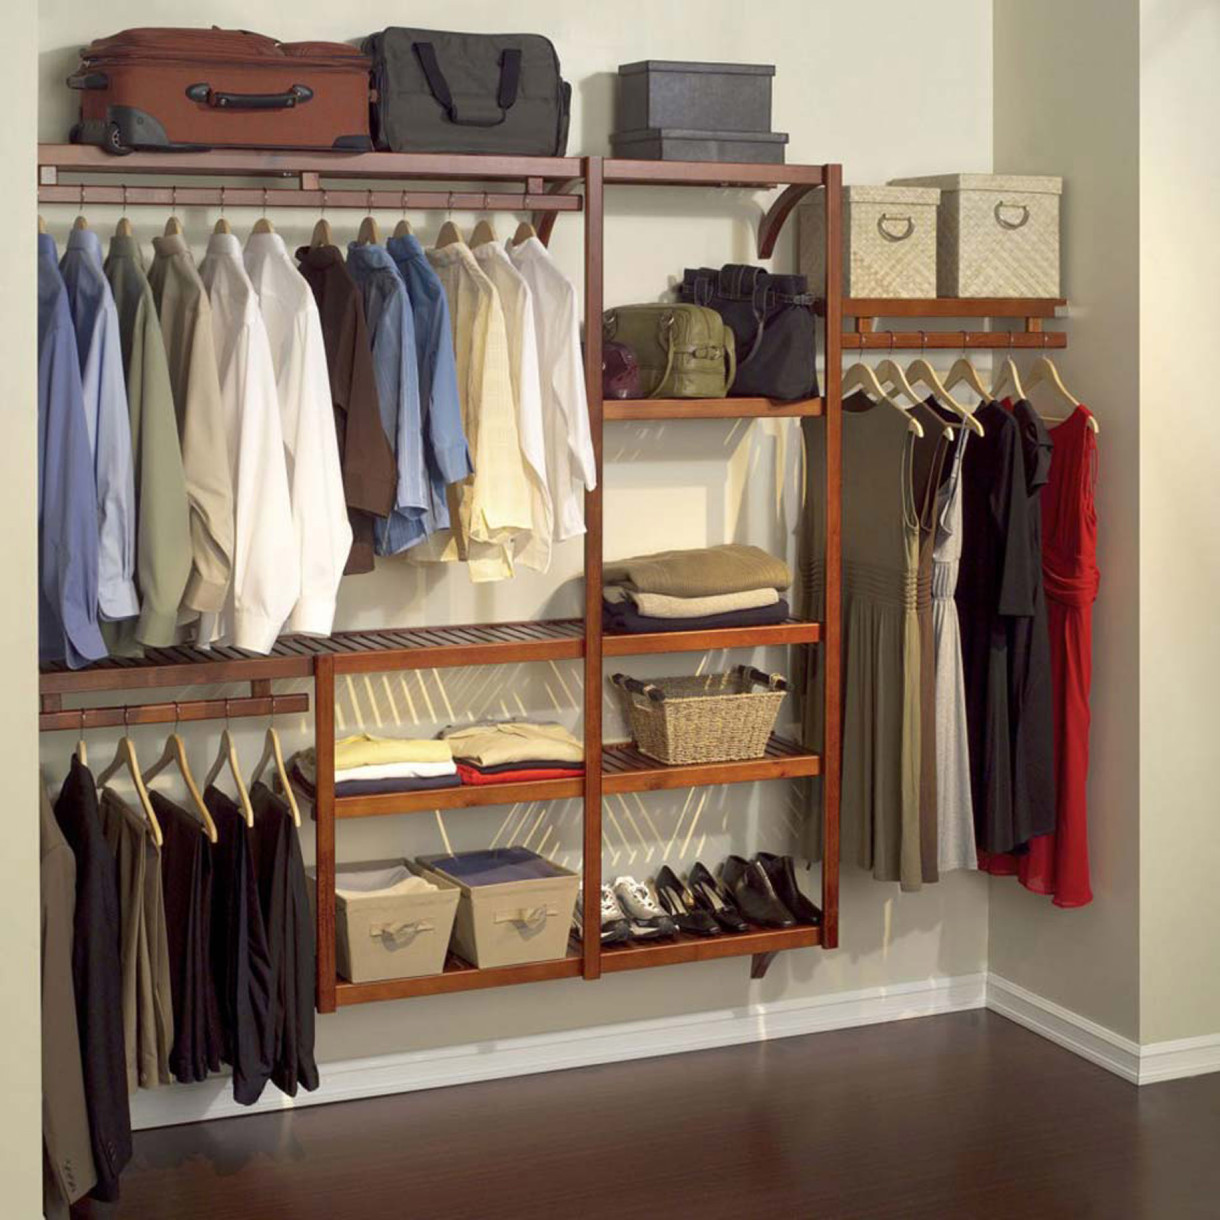 Cute-apartment-closet-ideas-with-wooden-rack-and-shelves-for-storing-shoes-and-shirt-closet-shoe-storage-ideas